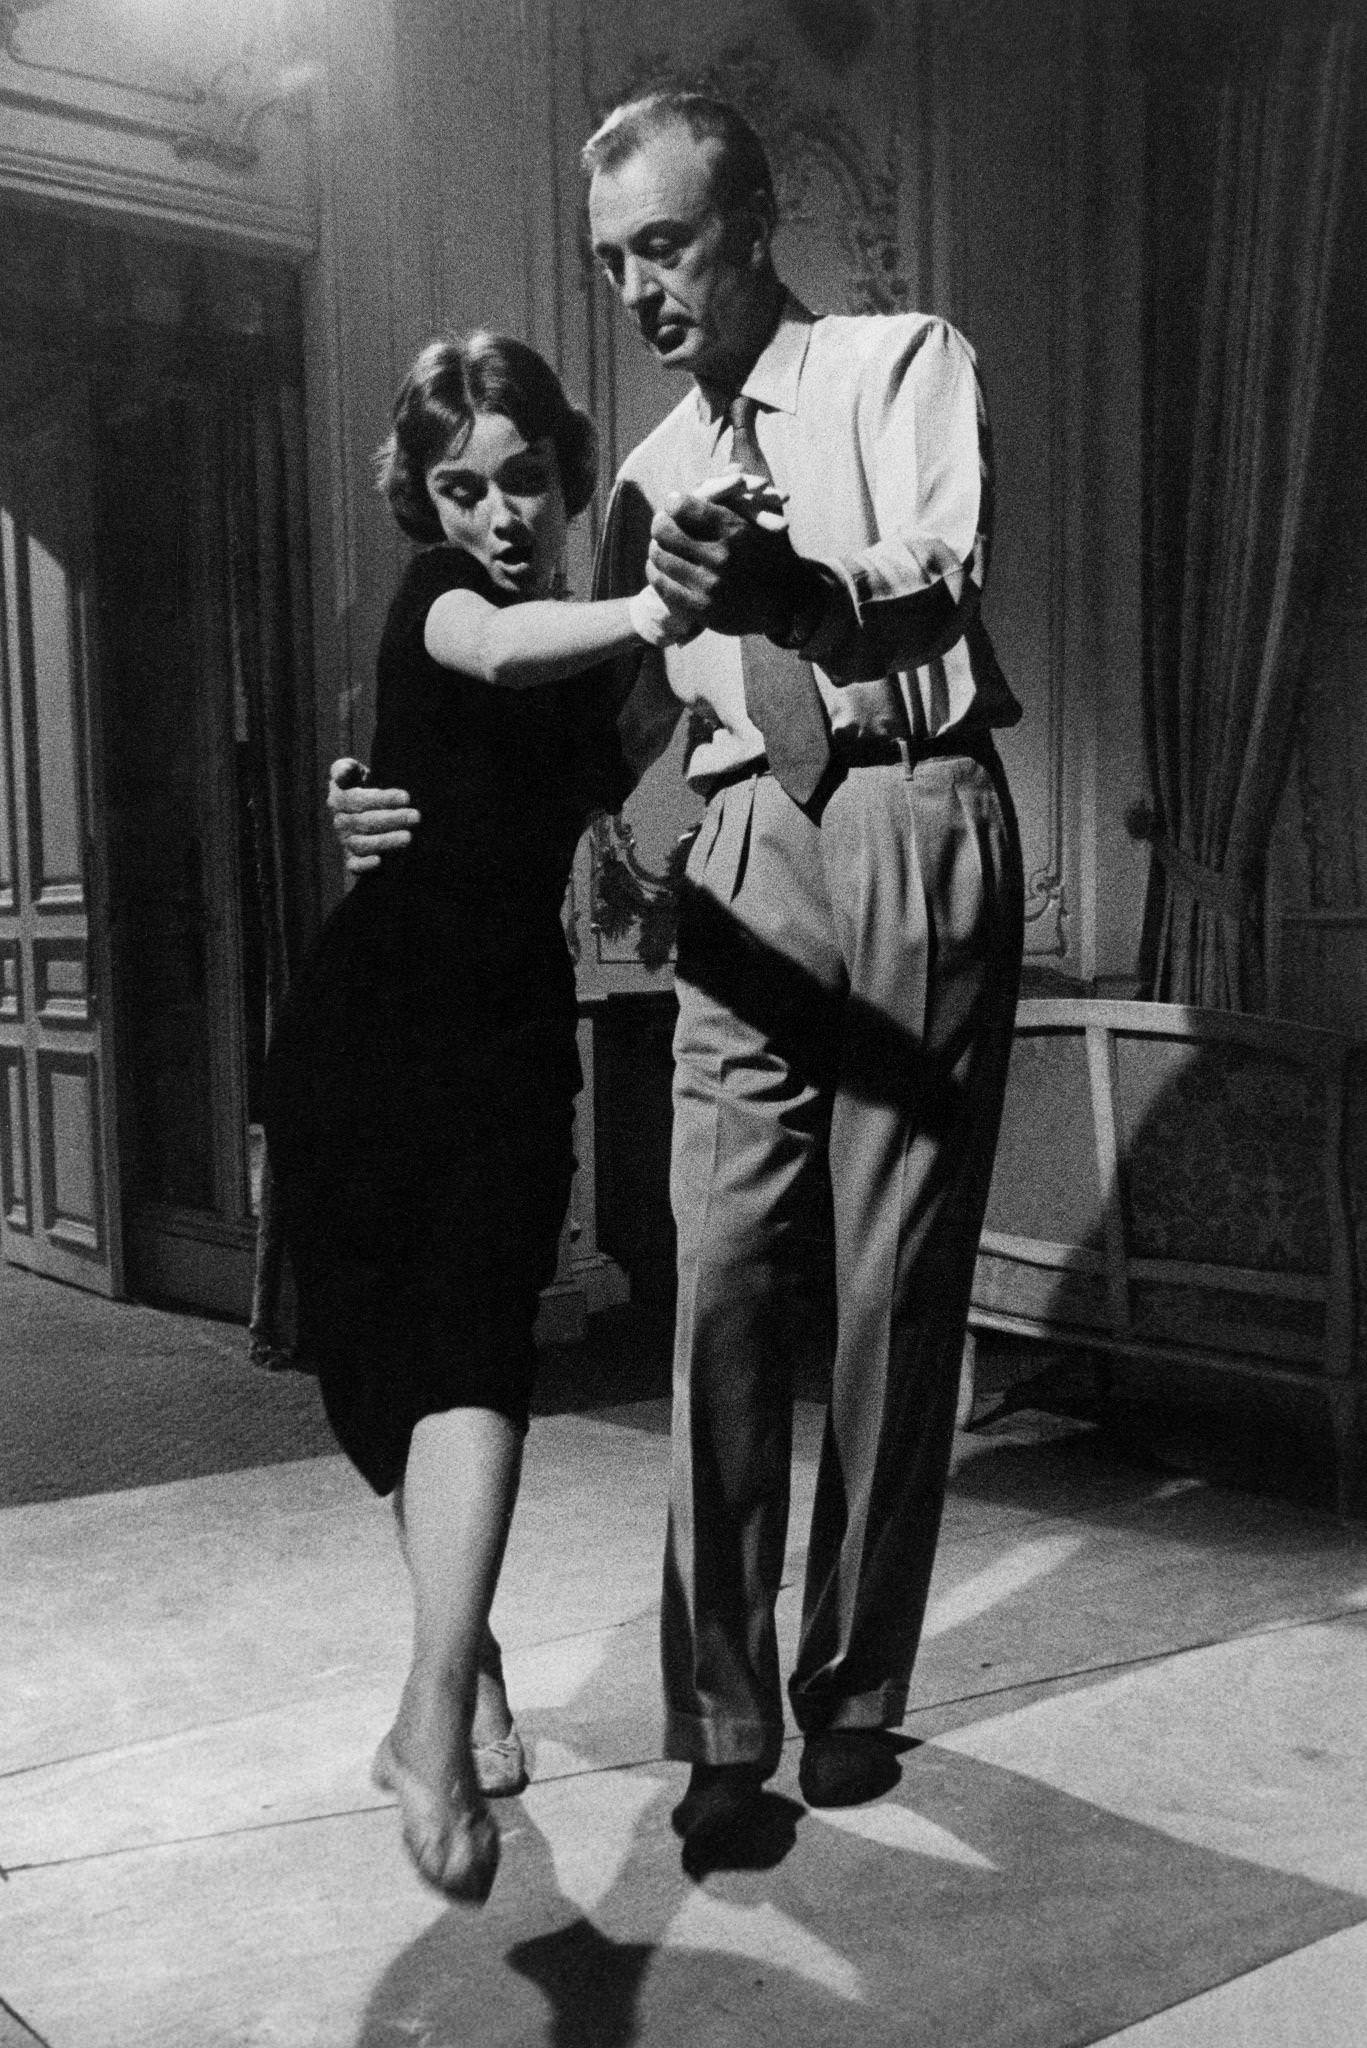 Audrey Hepburn dances with Gary Cooper during the filming of "Love in the Afternoon" in Paris, France.